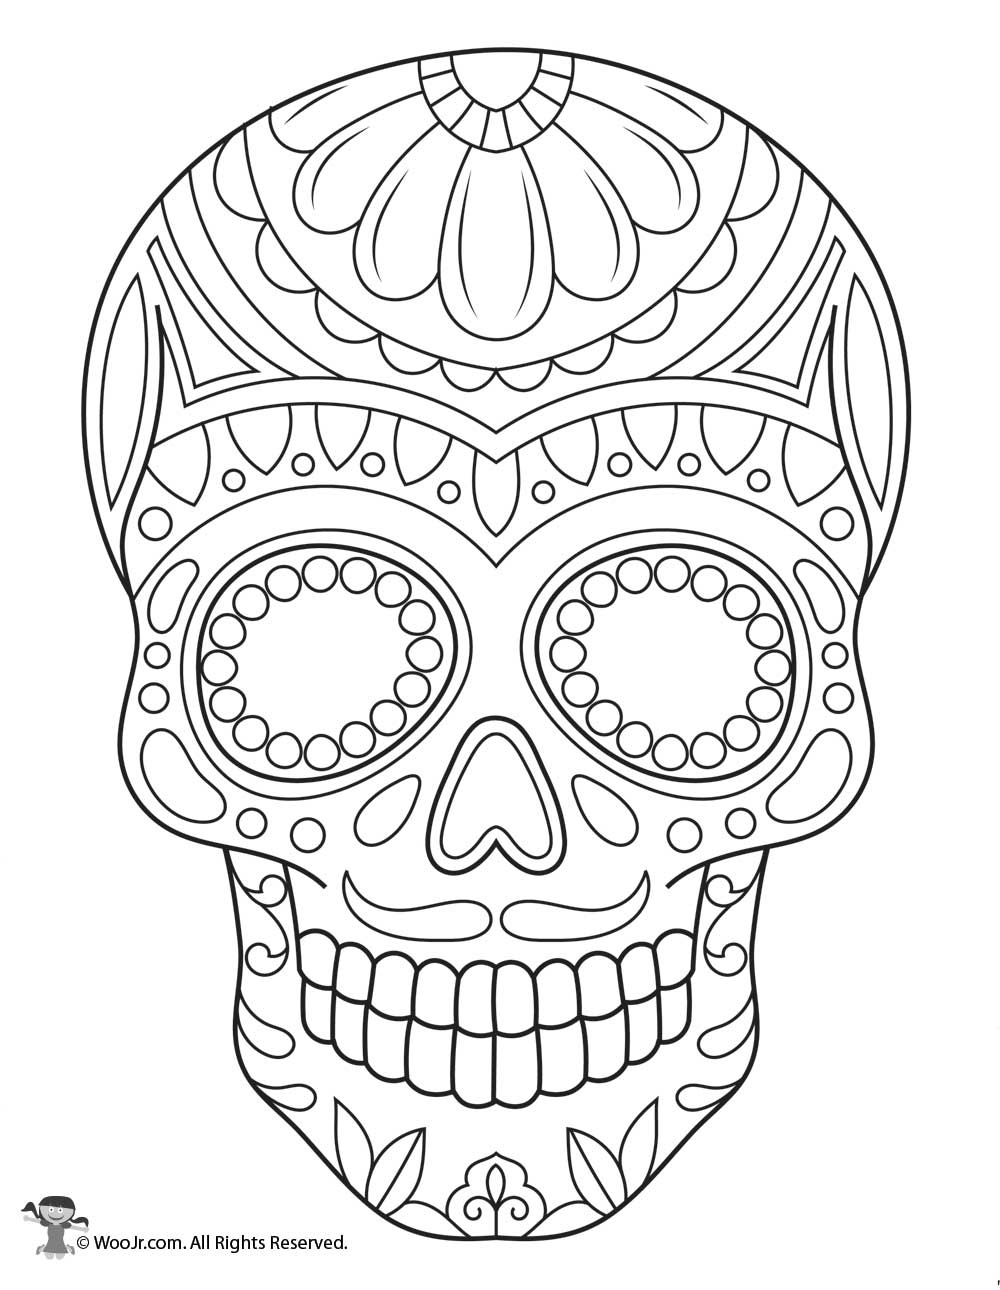  Skull  Cool  Coloring  Pages  For Boys Printable Skulls  